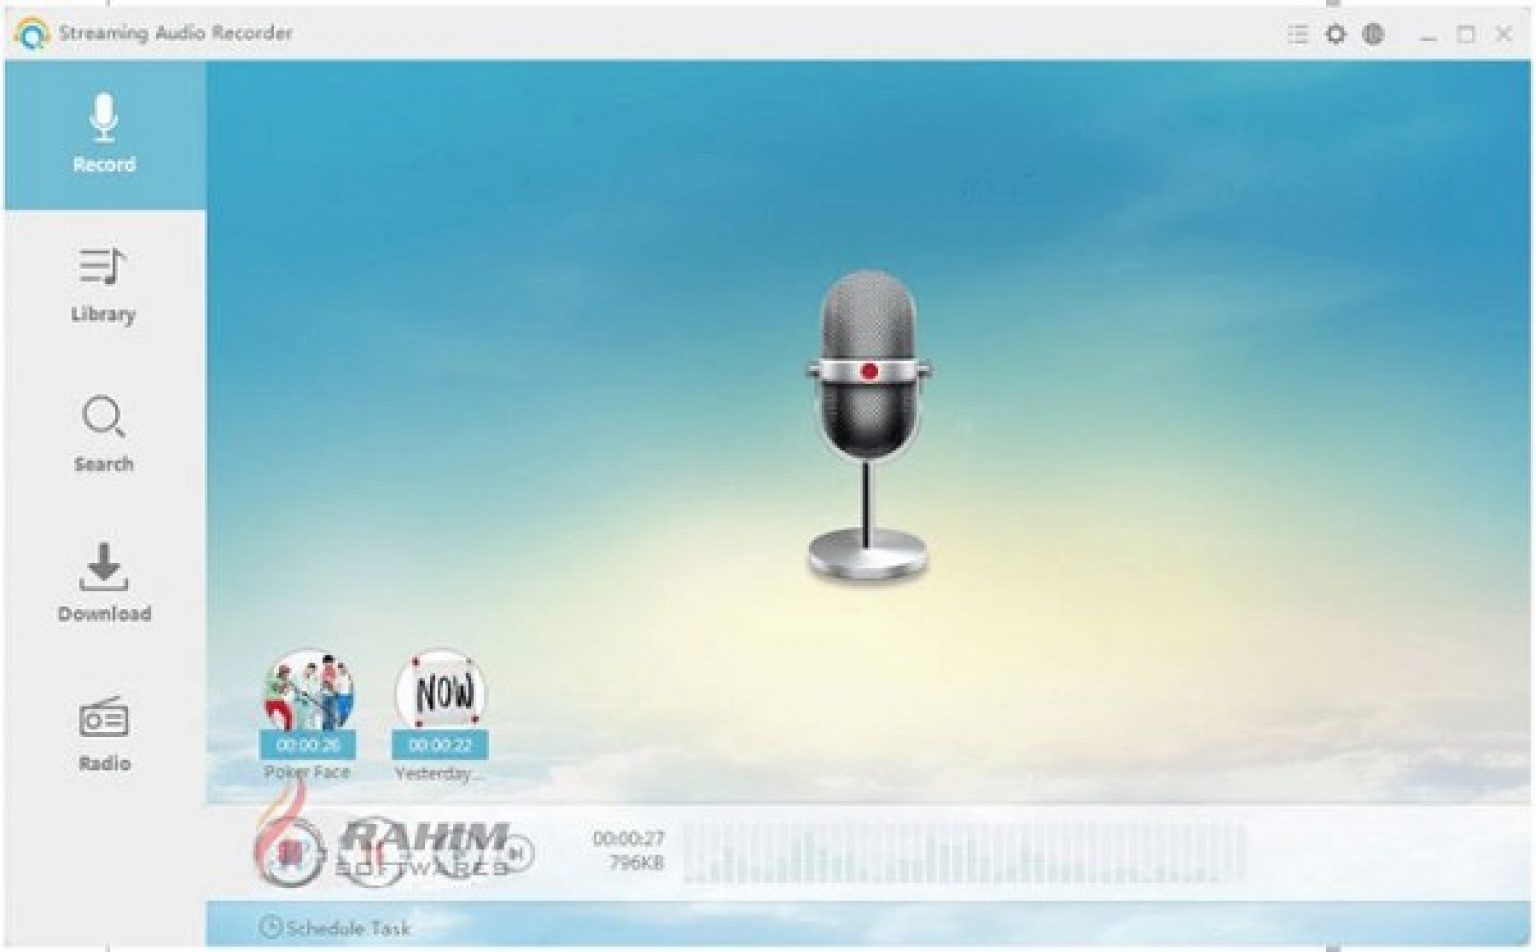 Abyssmedia i-Sound Recorder for Windows 7.9.4.3 free instals